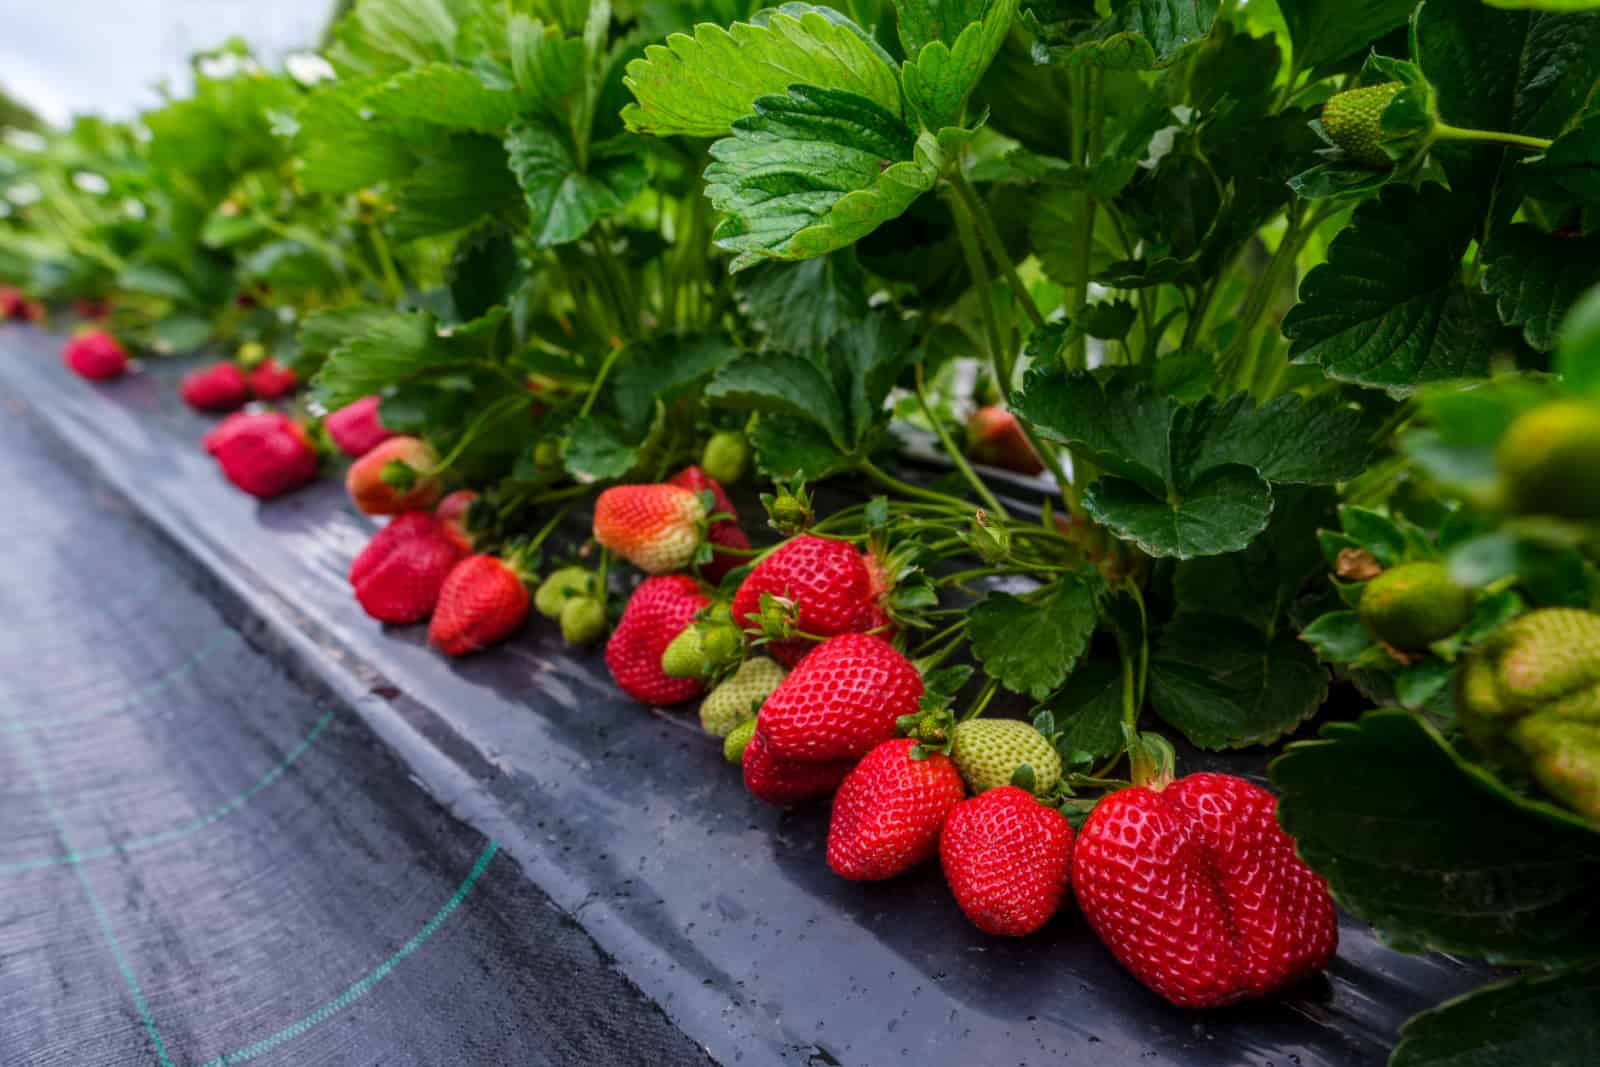 Rows of fresh strawberries that are grown in greenhouses